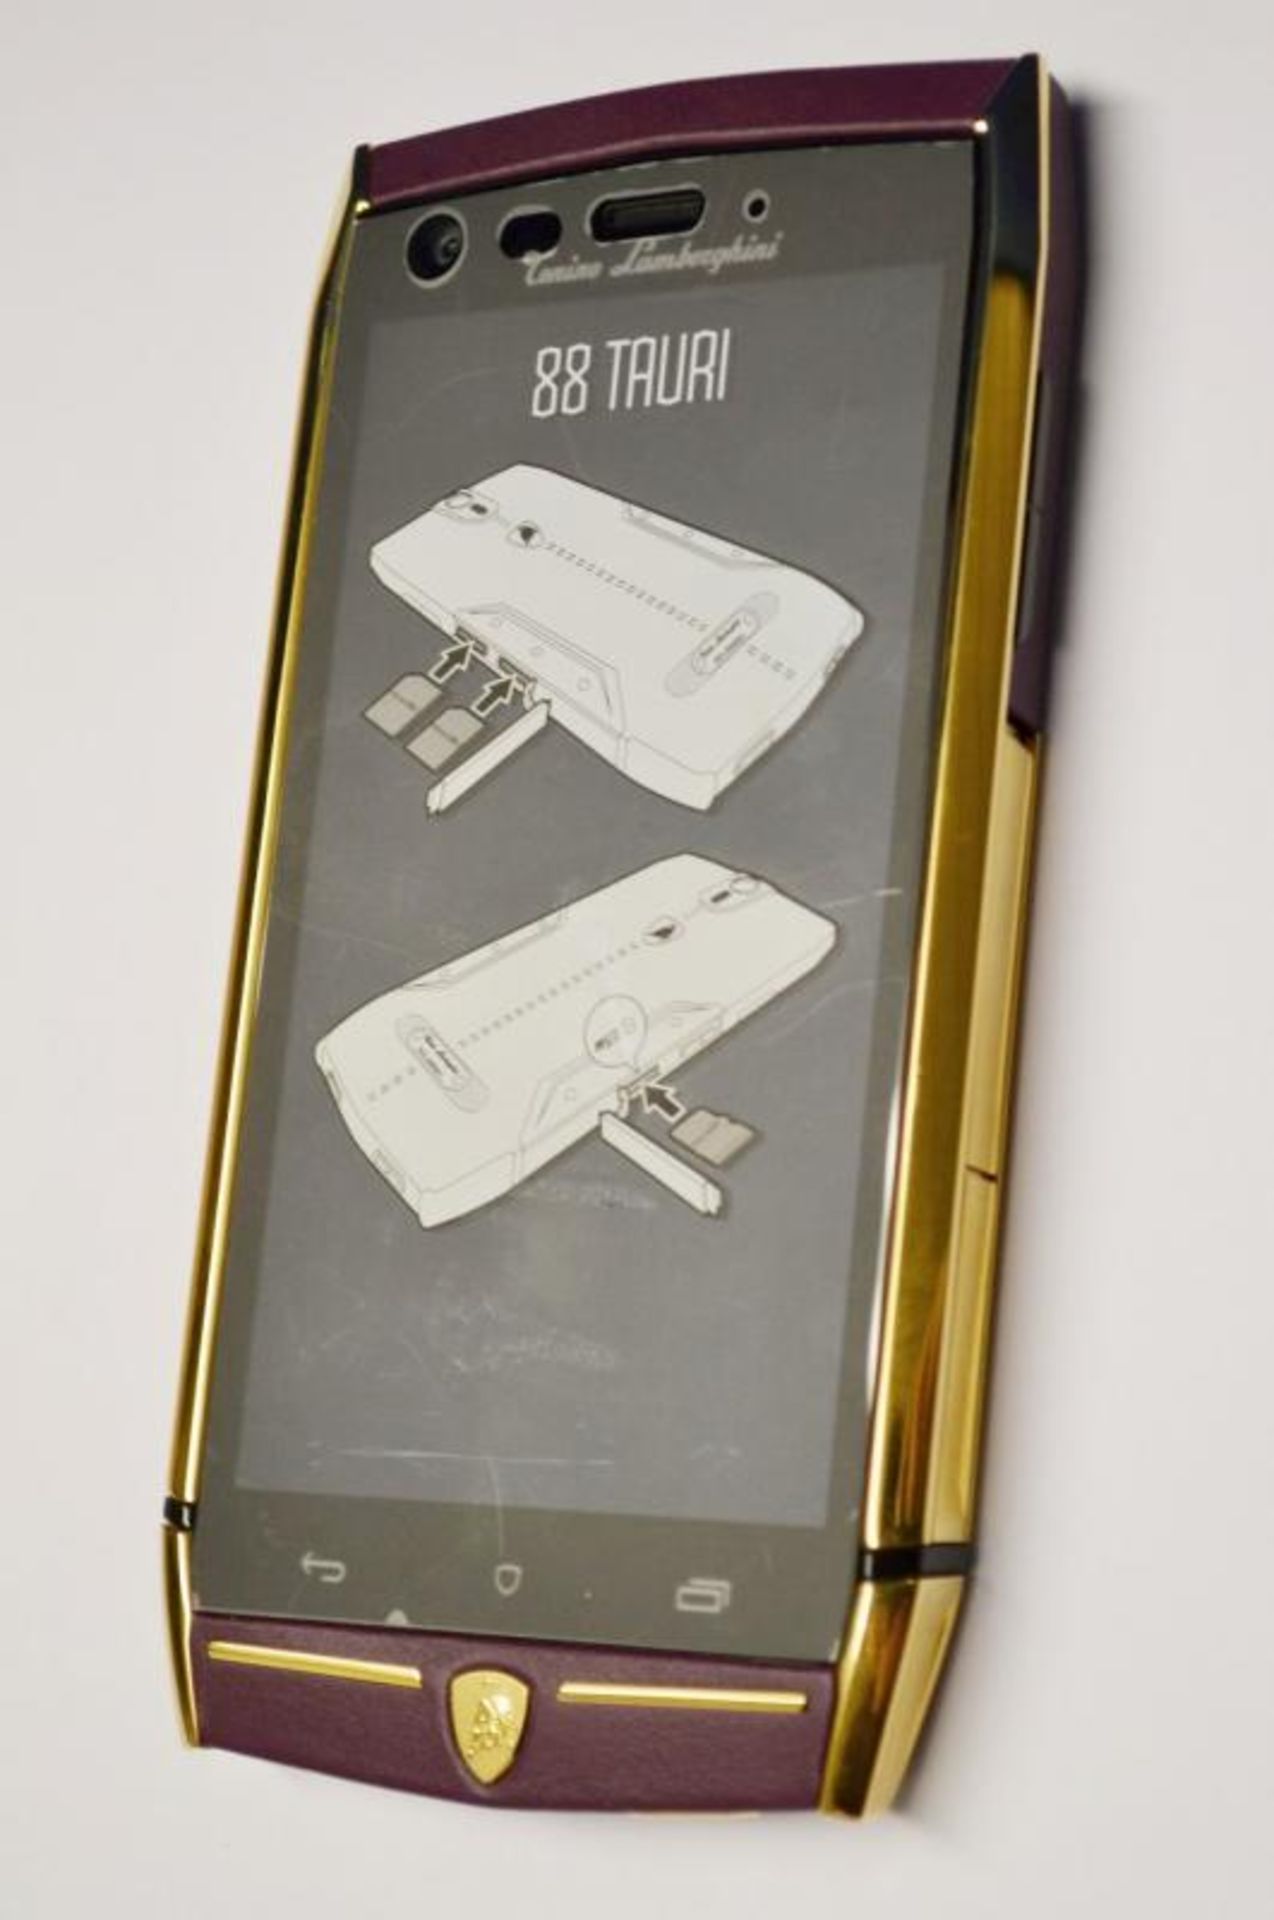 1 x Limited Edition Lamborghini "88 Tauri" Android Smart Phone - Art. 5522932 - Features Exquisite G - Image 3 of 18